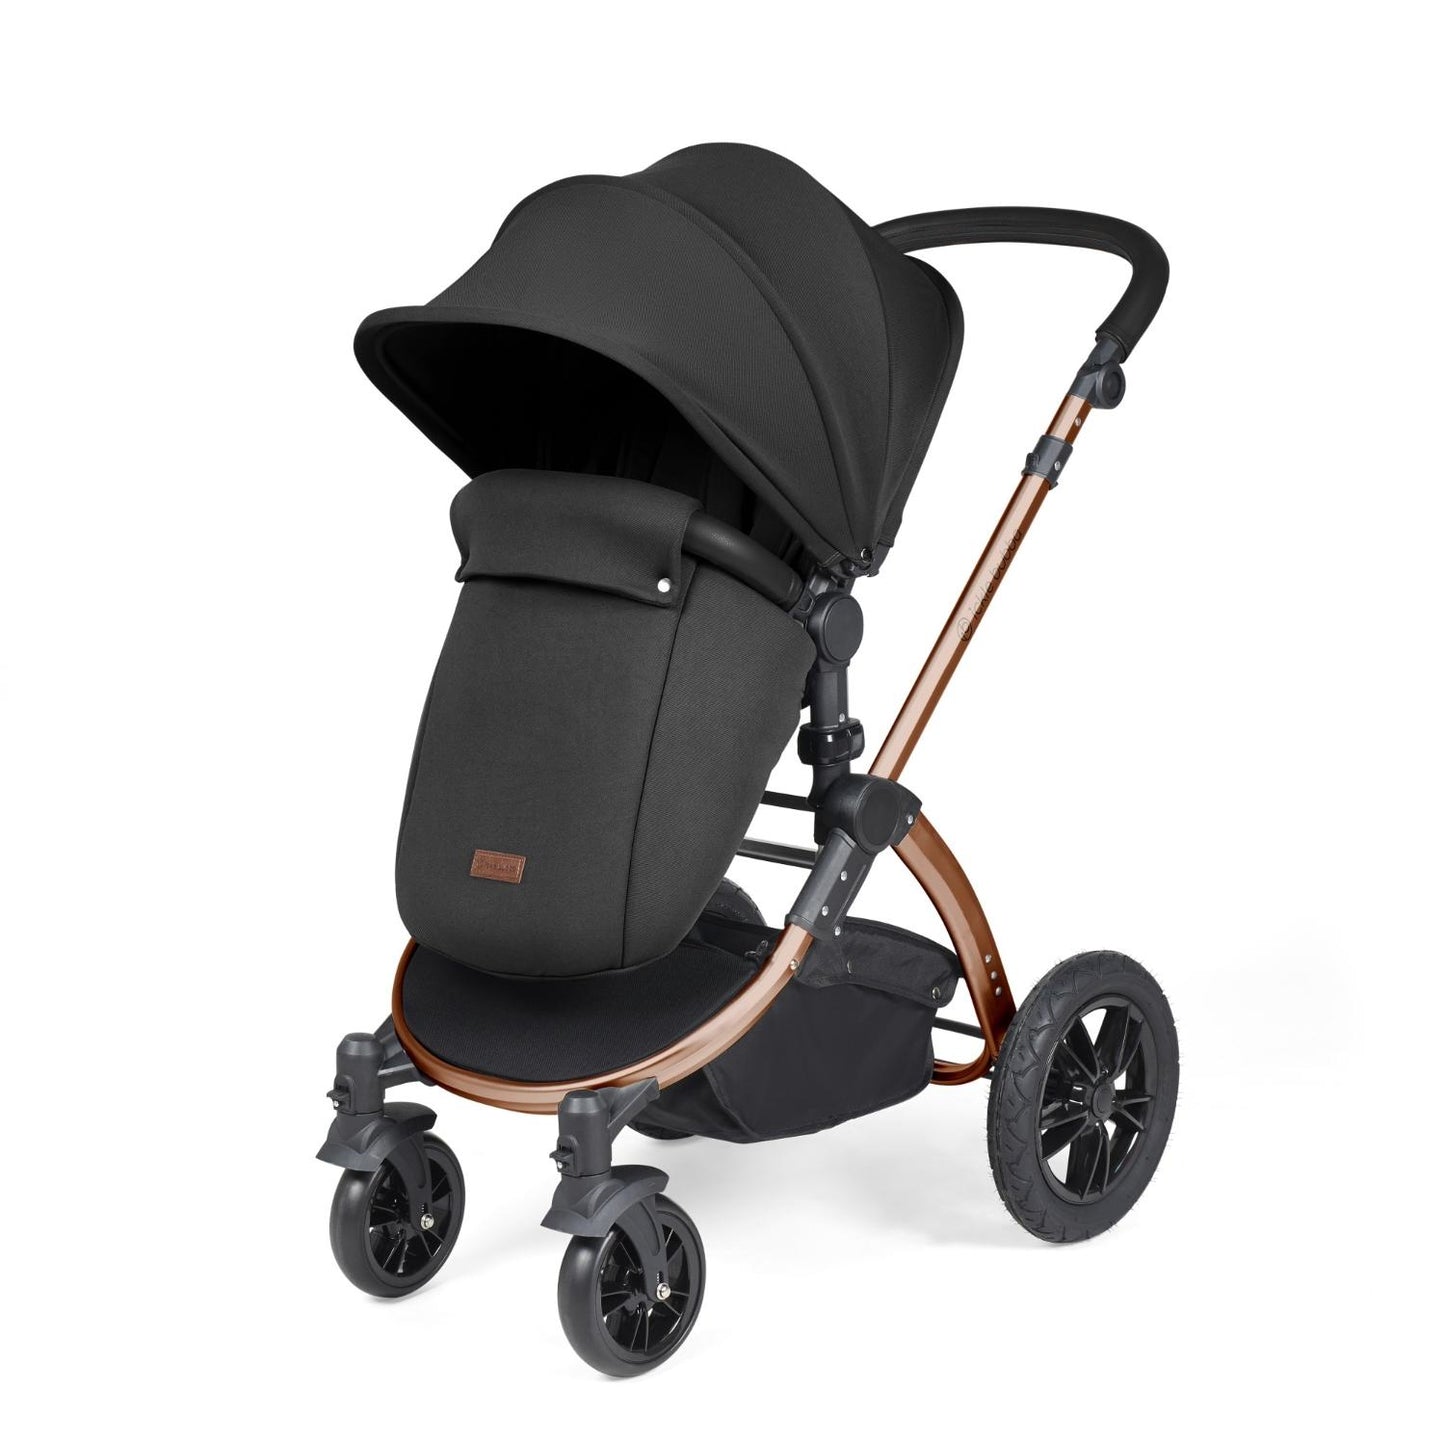 Ickle Bubba Stomp Luxe Pushchair with foot warmer attached in Midnight black colour with bronze chassis